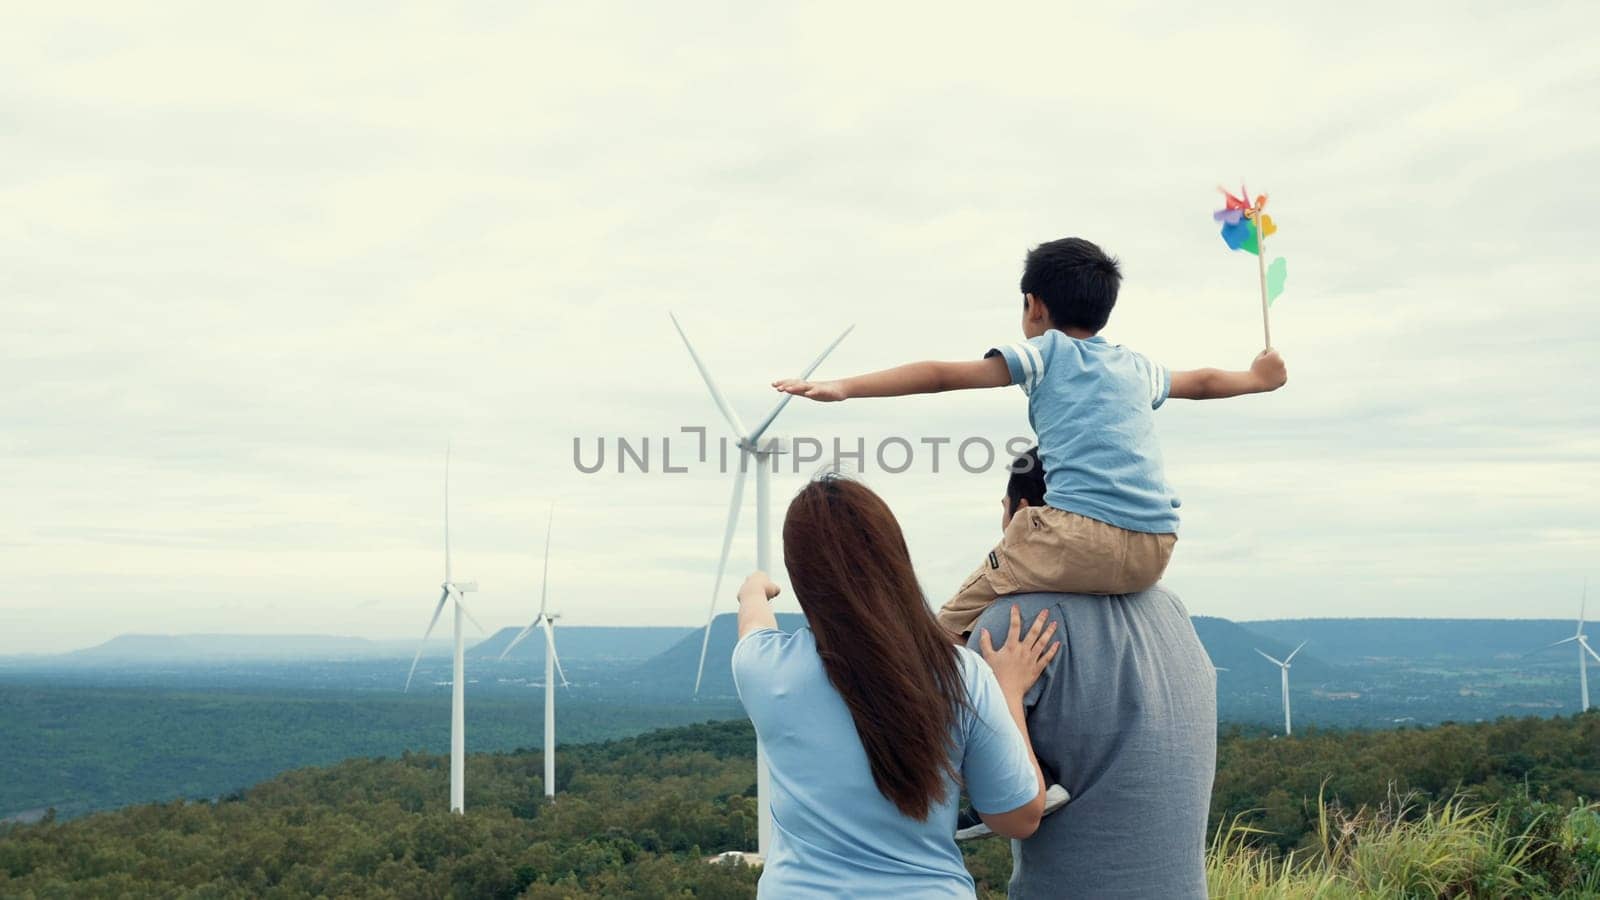 Concept of progressive happy family enjoying their time at the wind turbine farm by biancoblue